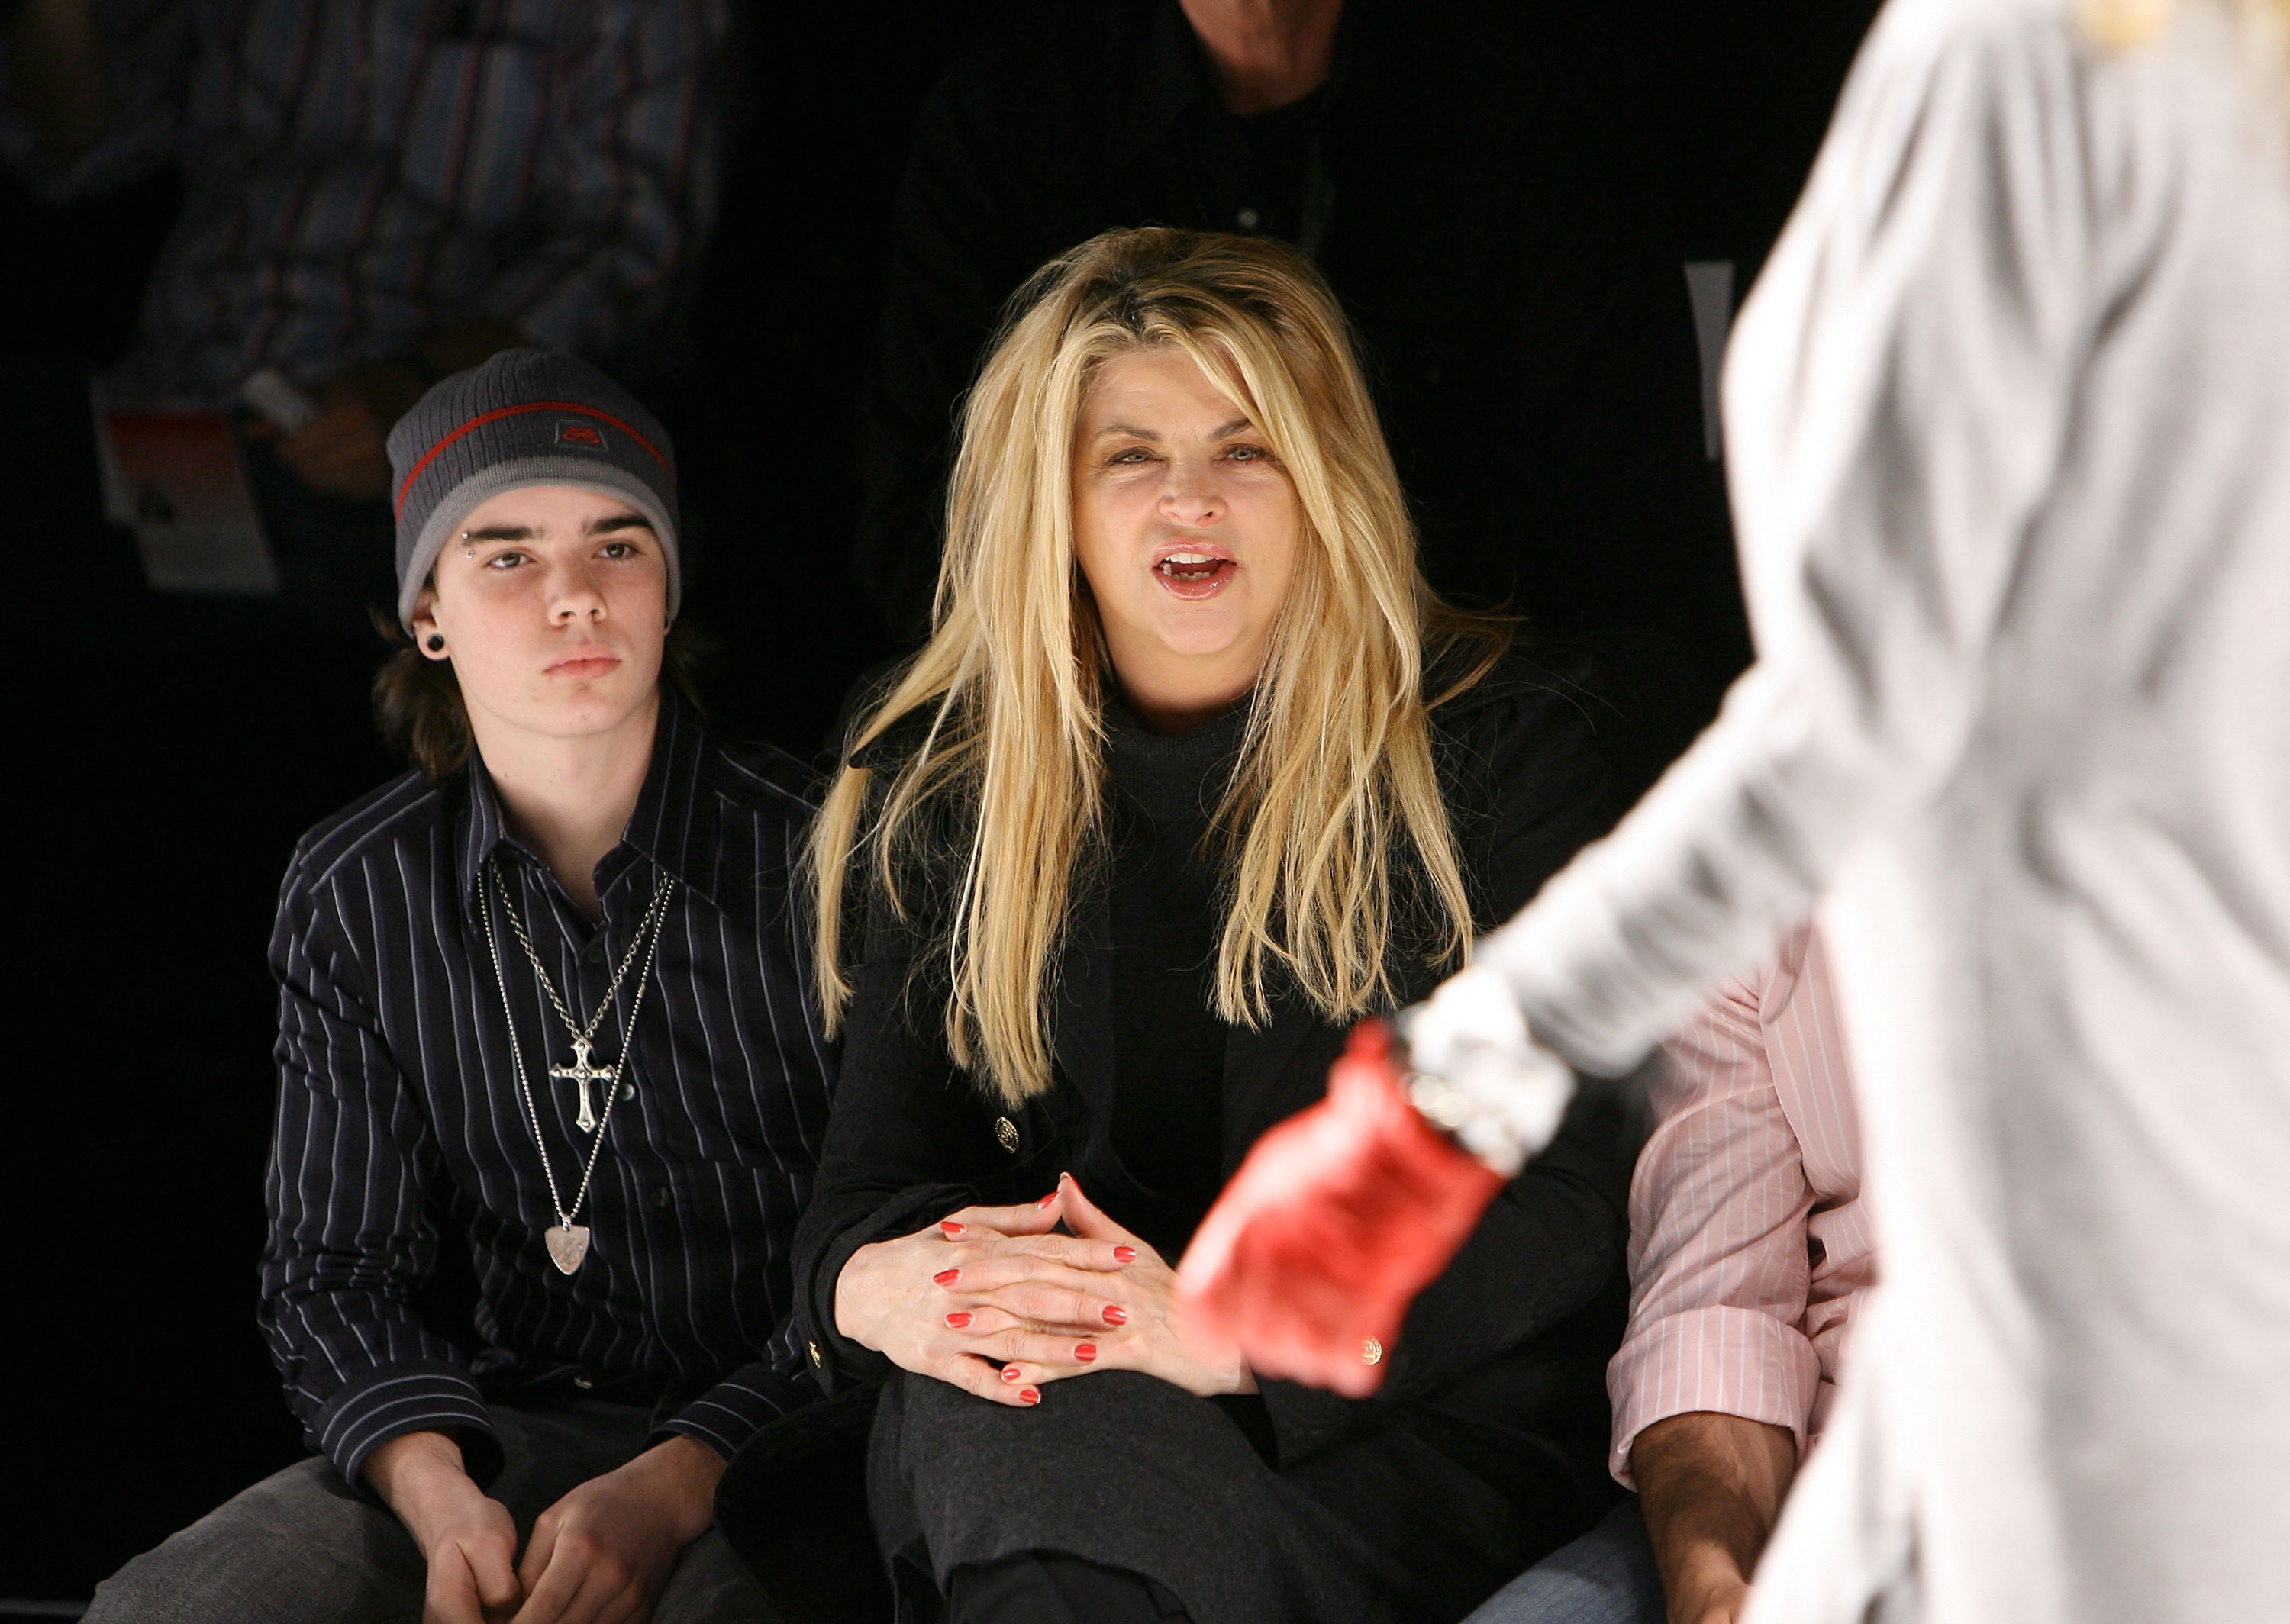 Kirstie Alley and William True front row at Whitley Kros Fall collection during Mercedes Benz LA Fashion Week held at Smashbox Studios in Culver City, California on March 9, 2008. | Source: Getty Images